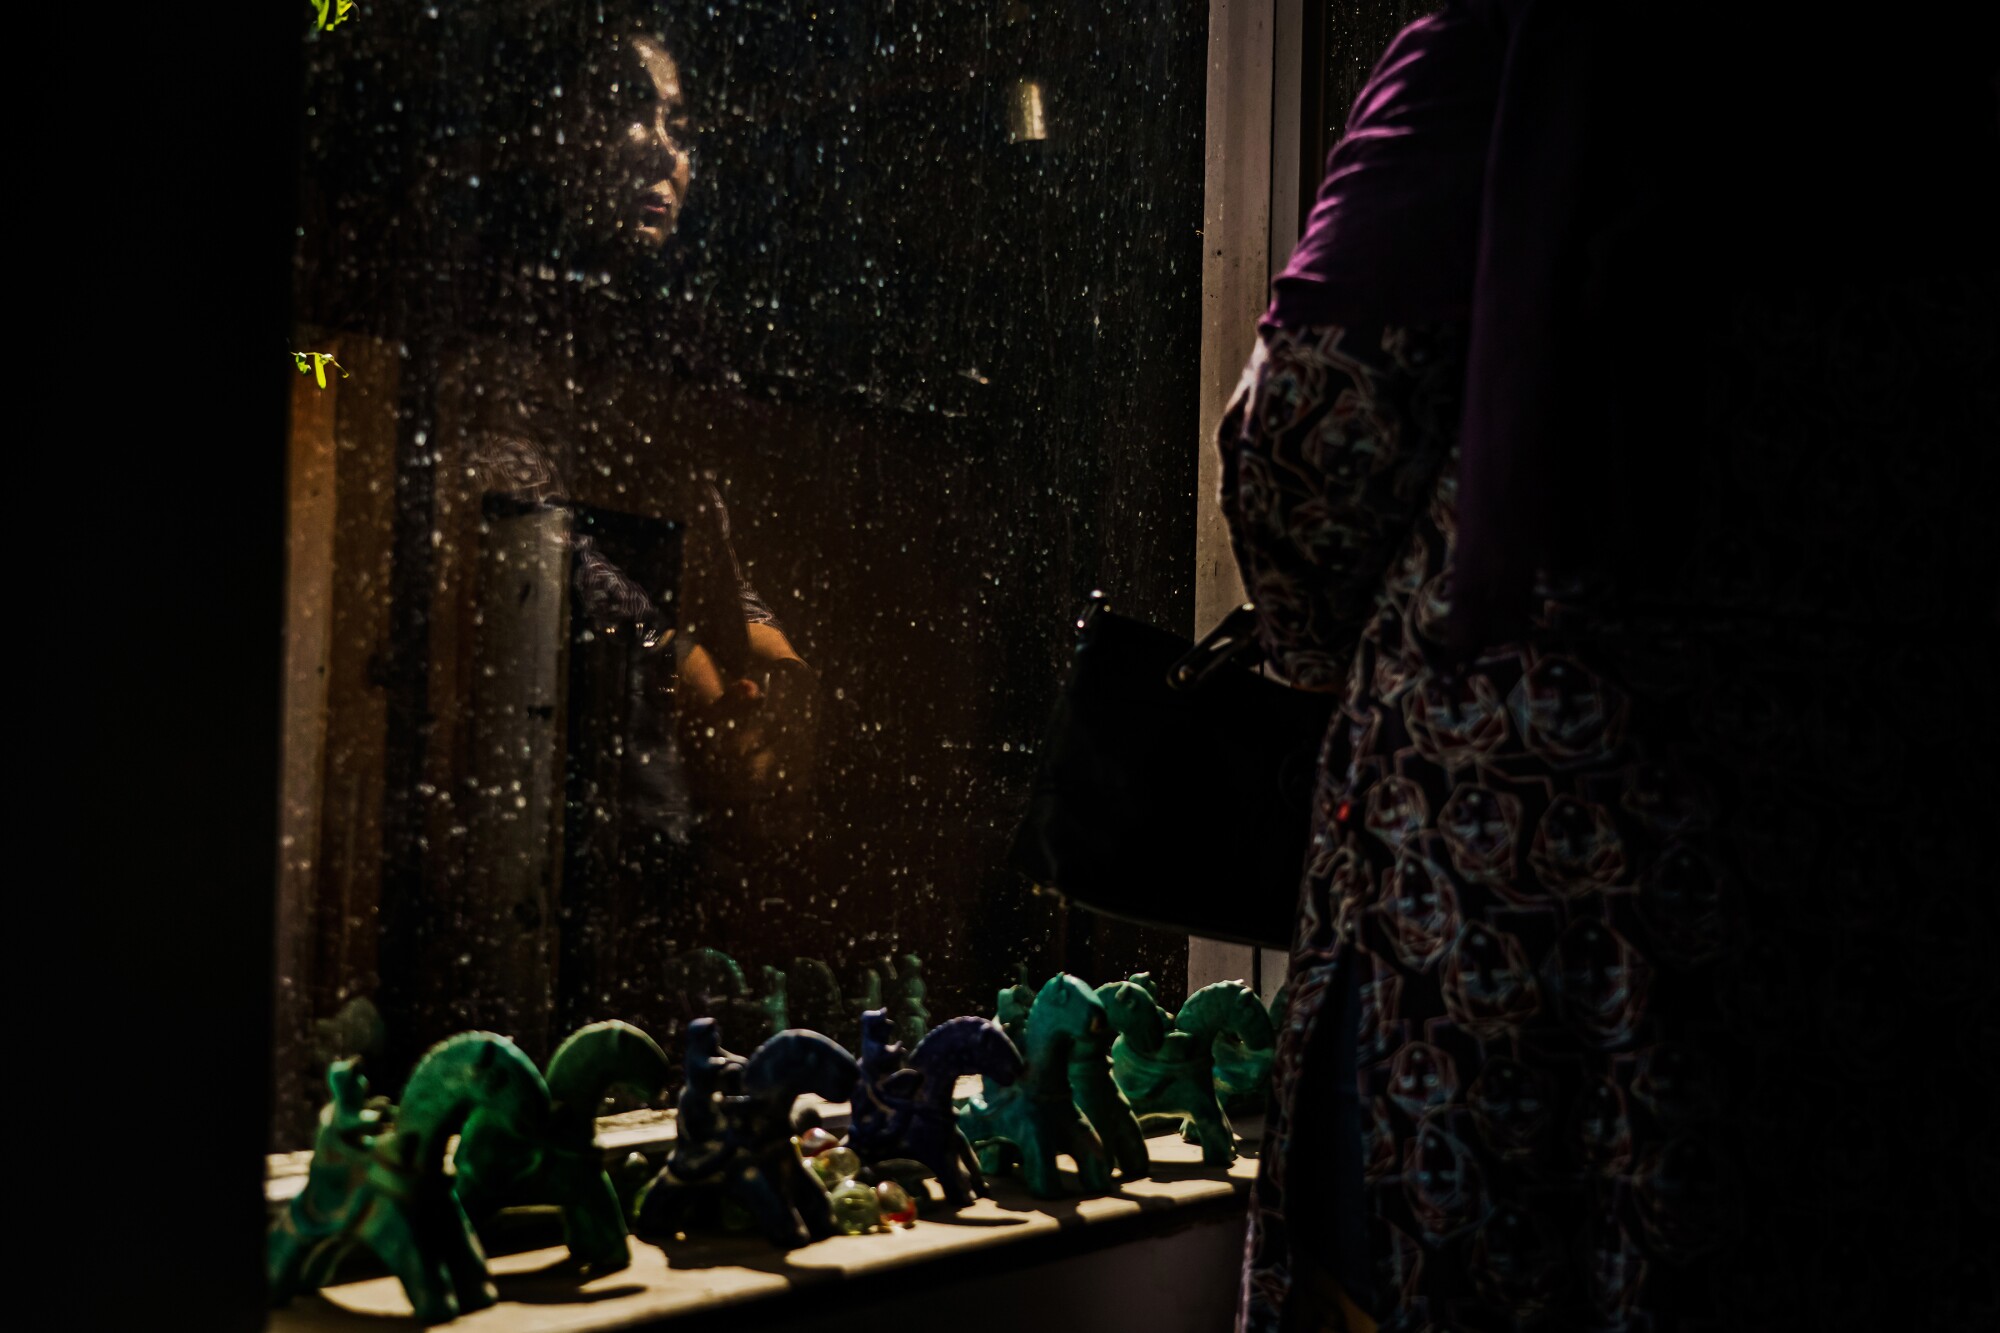 A weeping woman is reflected in a window, green horsemen figurines line the sill.